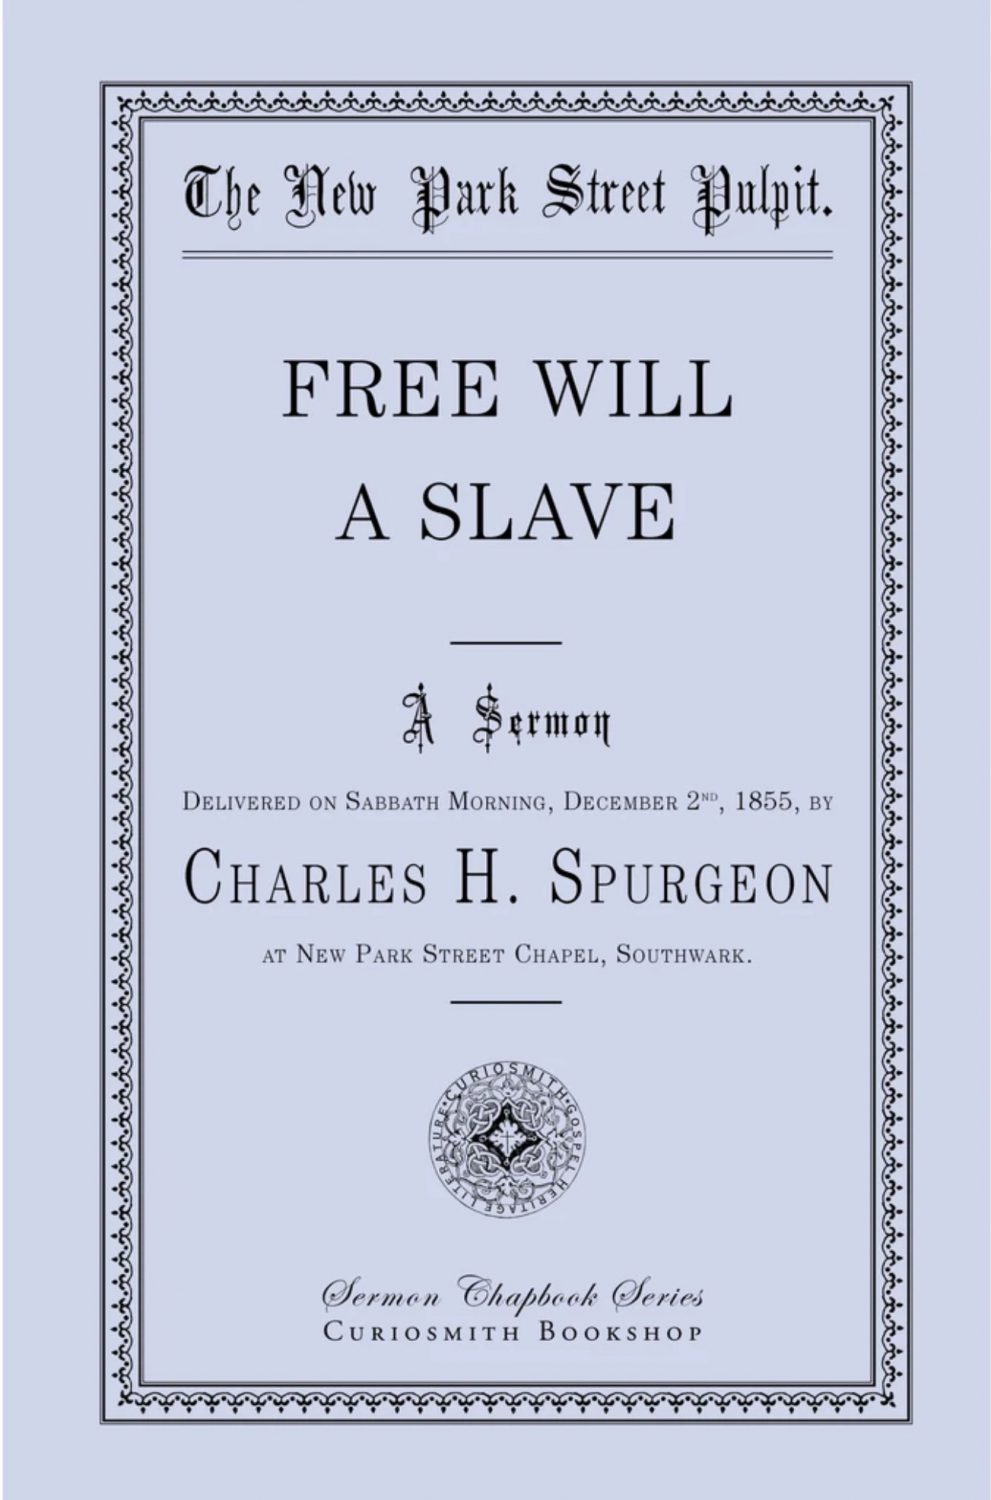 Free Will - A Slave